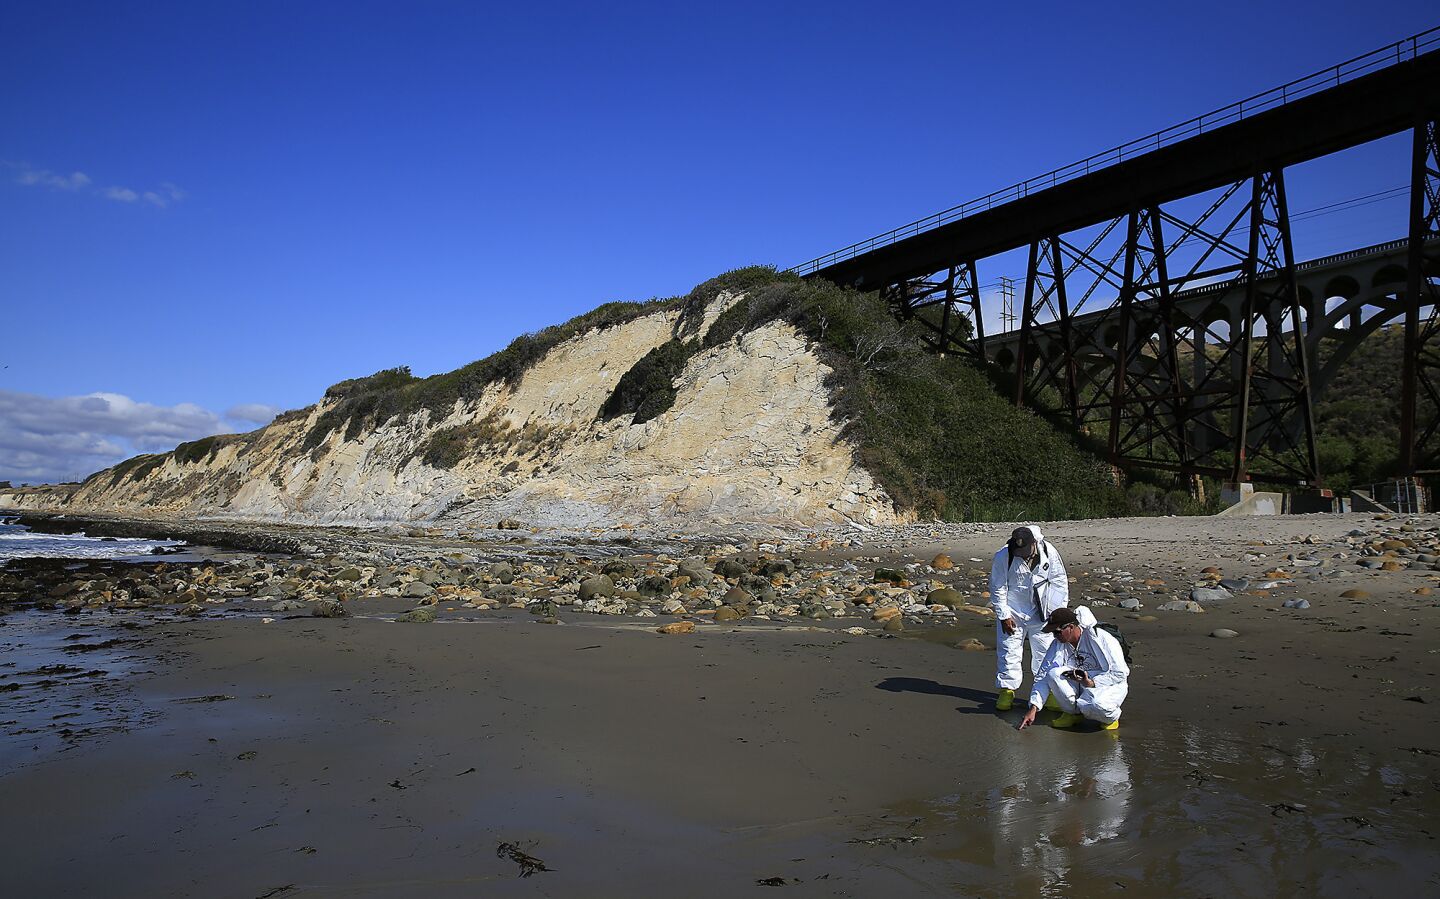 Scientists from the California Department of Fish and Wildlife and the UCSB Marine Science Institute conduct natural resource damage assessments at the Arroyo Hondo in the aftermath of the oil spill on the Gaviota coast.